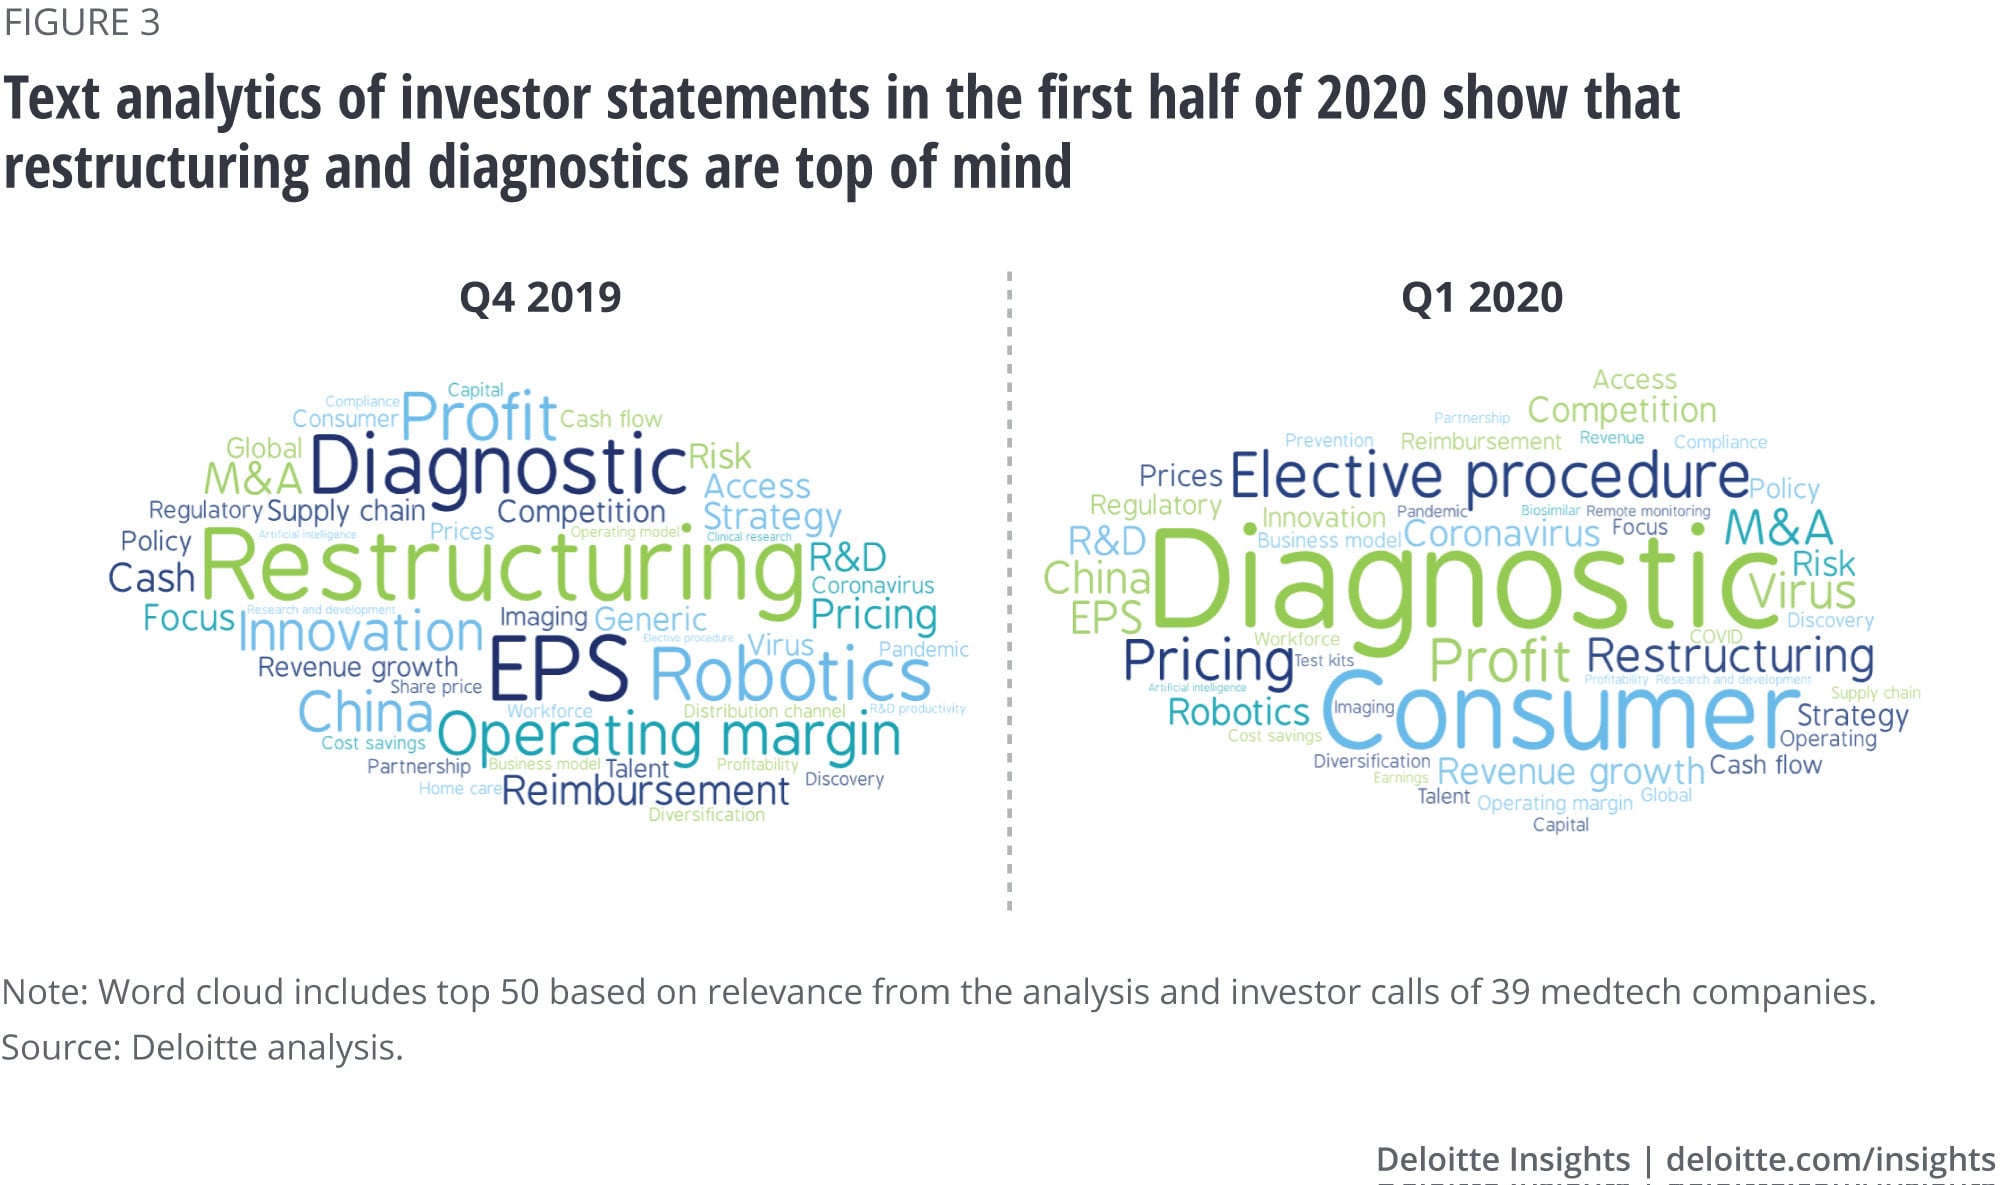 Text analysis finds greater emphasis on diagnostics and consumers from previous quarter